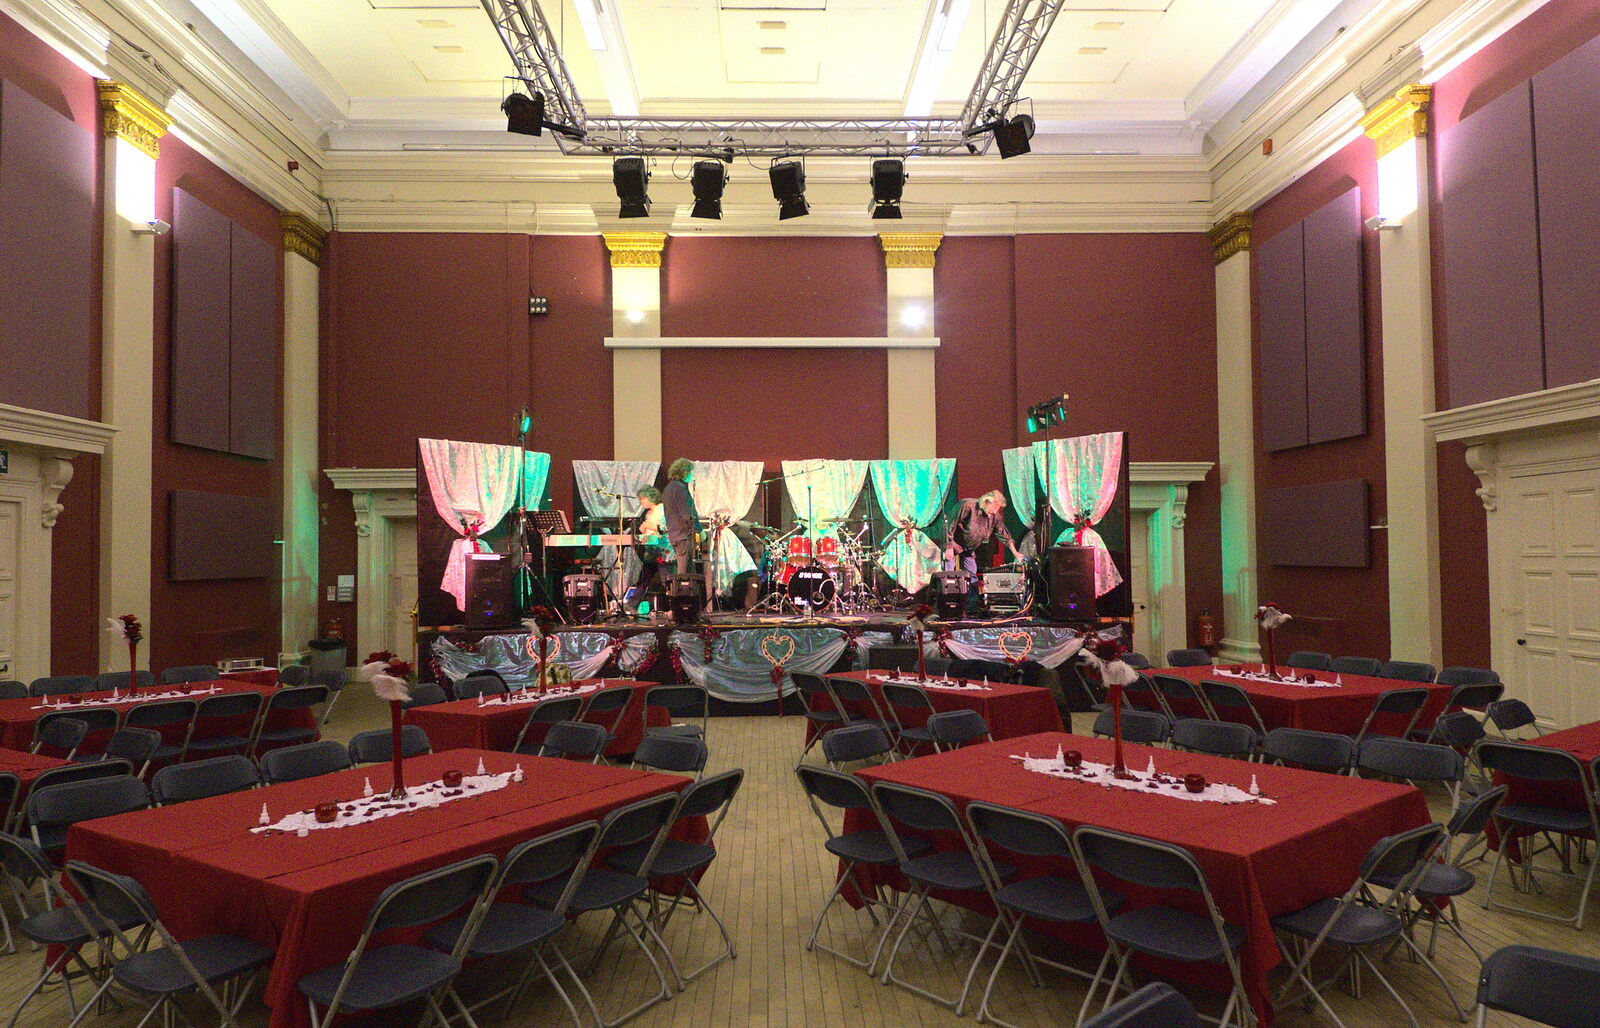 The tables are all set up from The BBs at The Cornhall, Diss, Norfolk - 31st January 2013